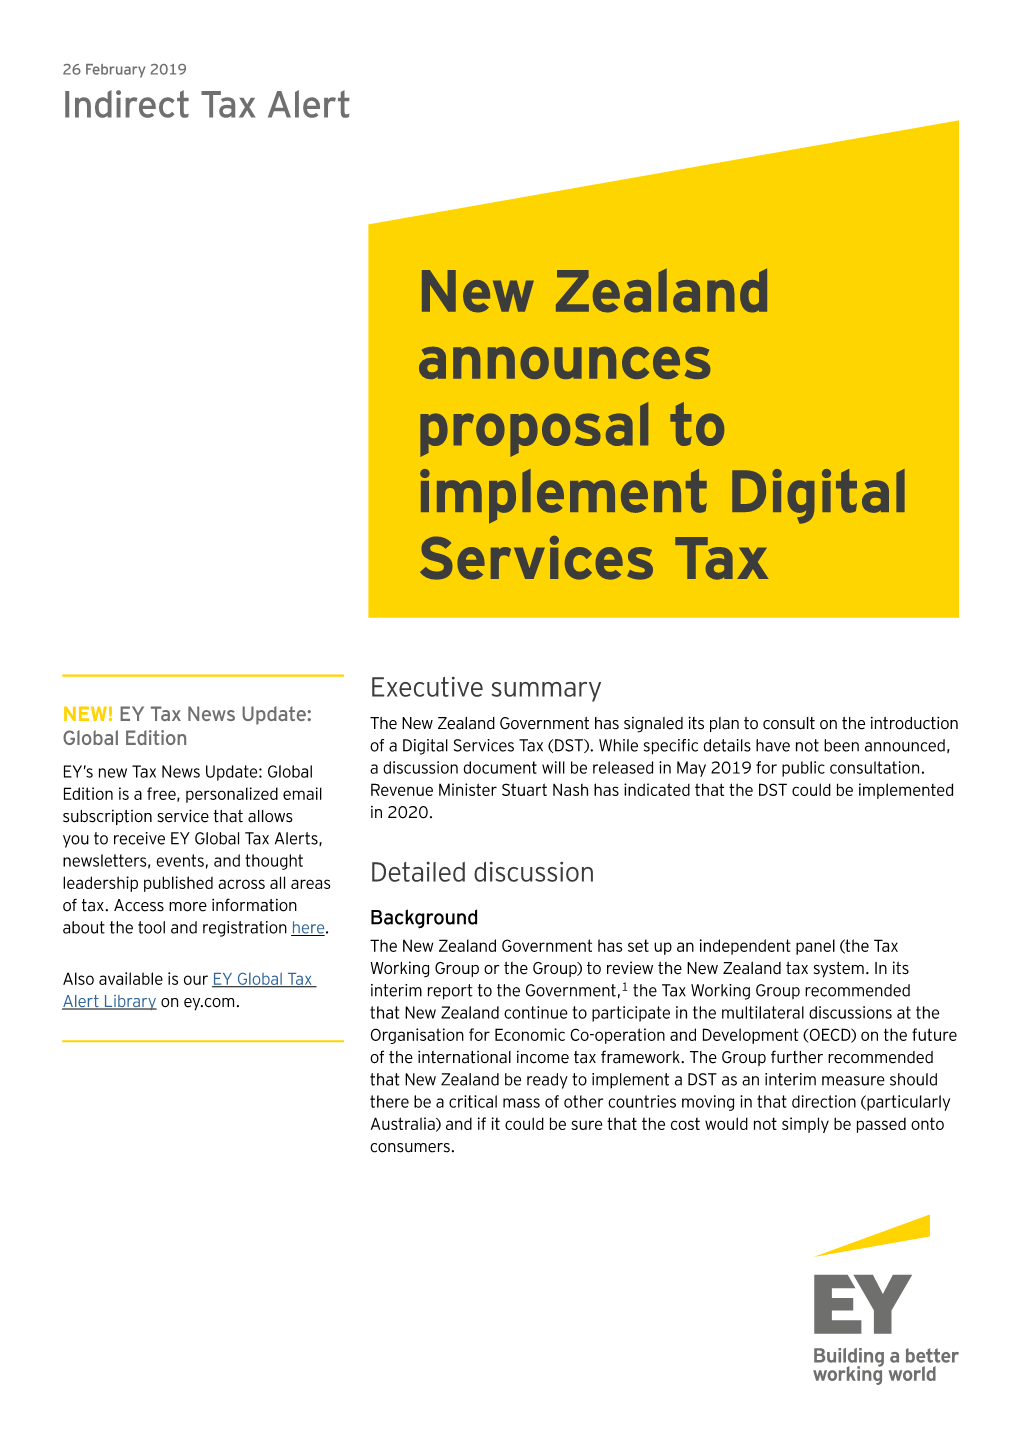 New Zealand Announces Proposal to Implement Digital Services Tax